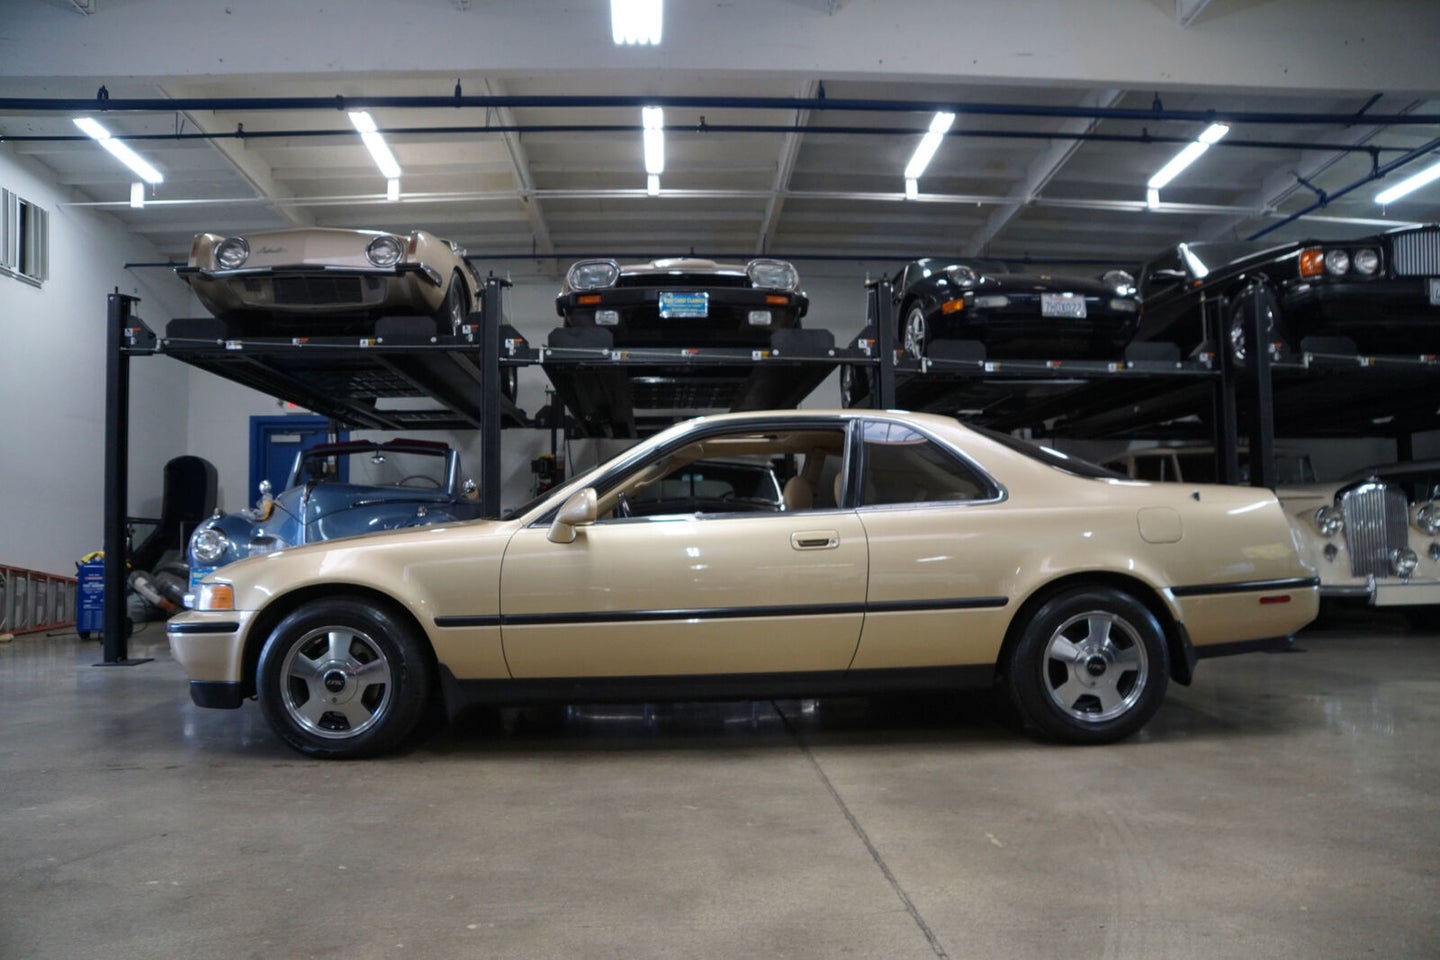 Buy This Tan 1991 Acura Legend With a Manual, Become an Acura Legend in Your Neighborhood